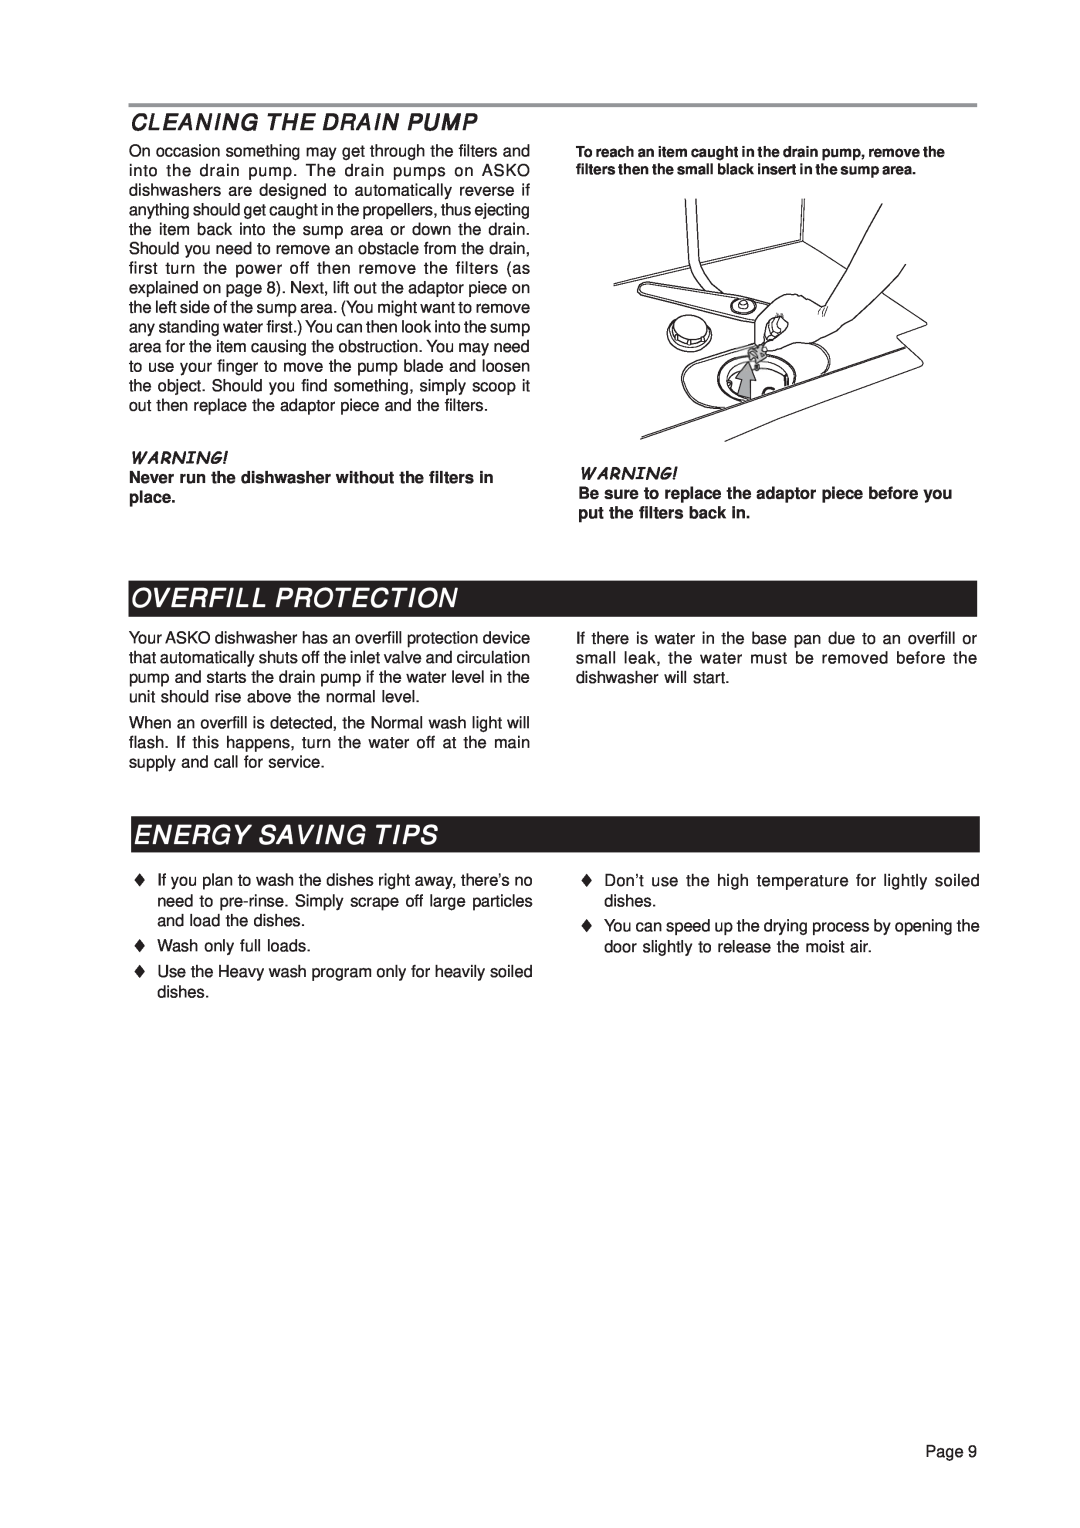 Asko D3112 important safety instructions Overfill Protection, Energy Saving Tips, Cleaning The Drain Pump 